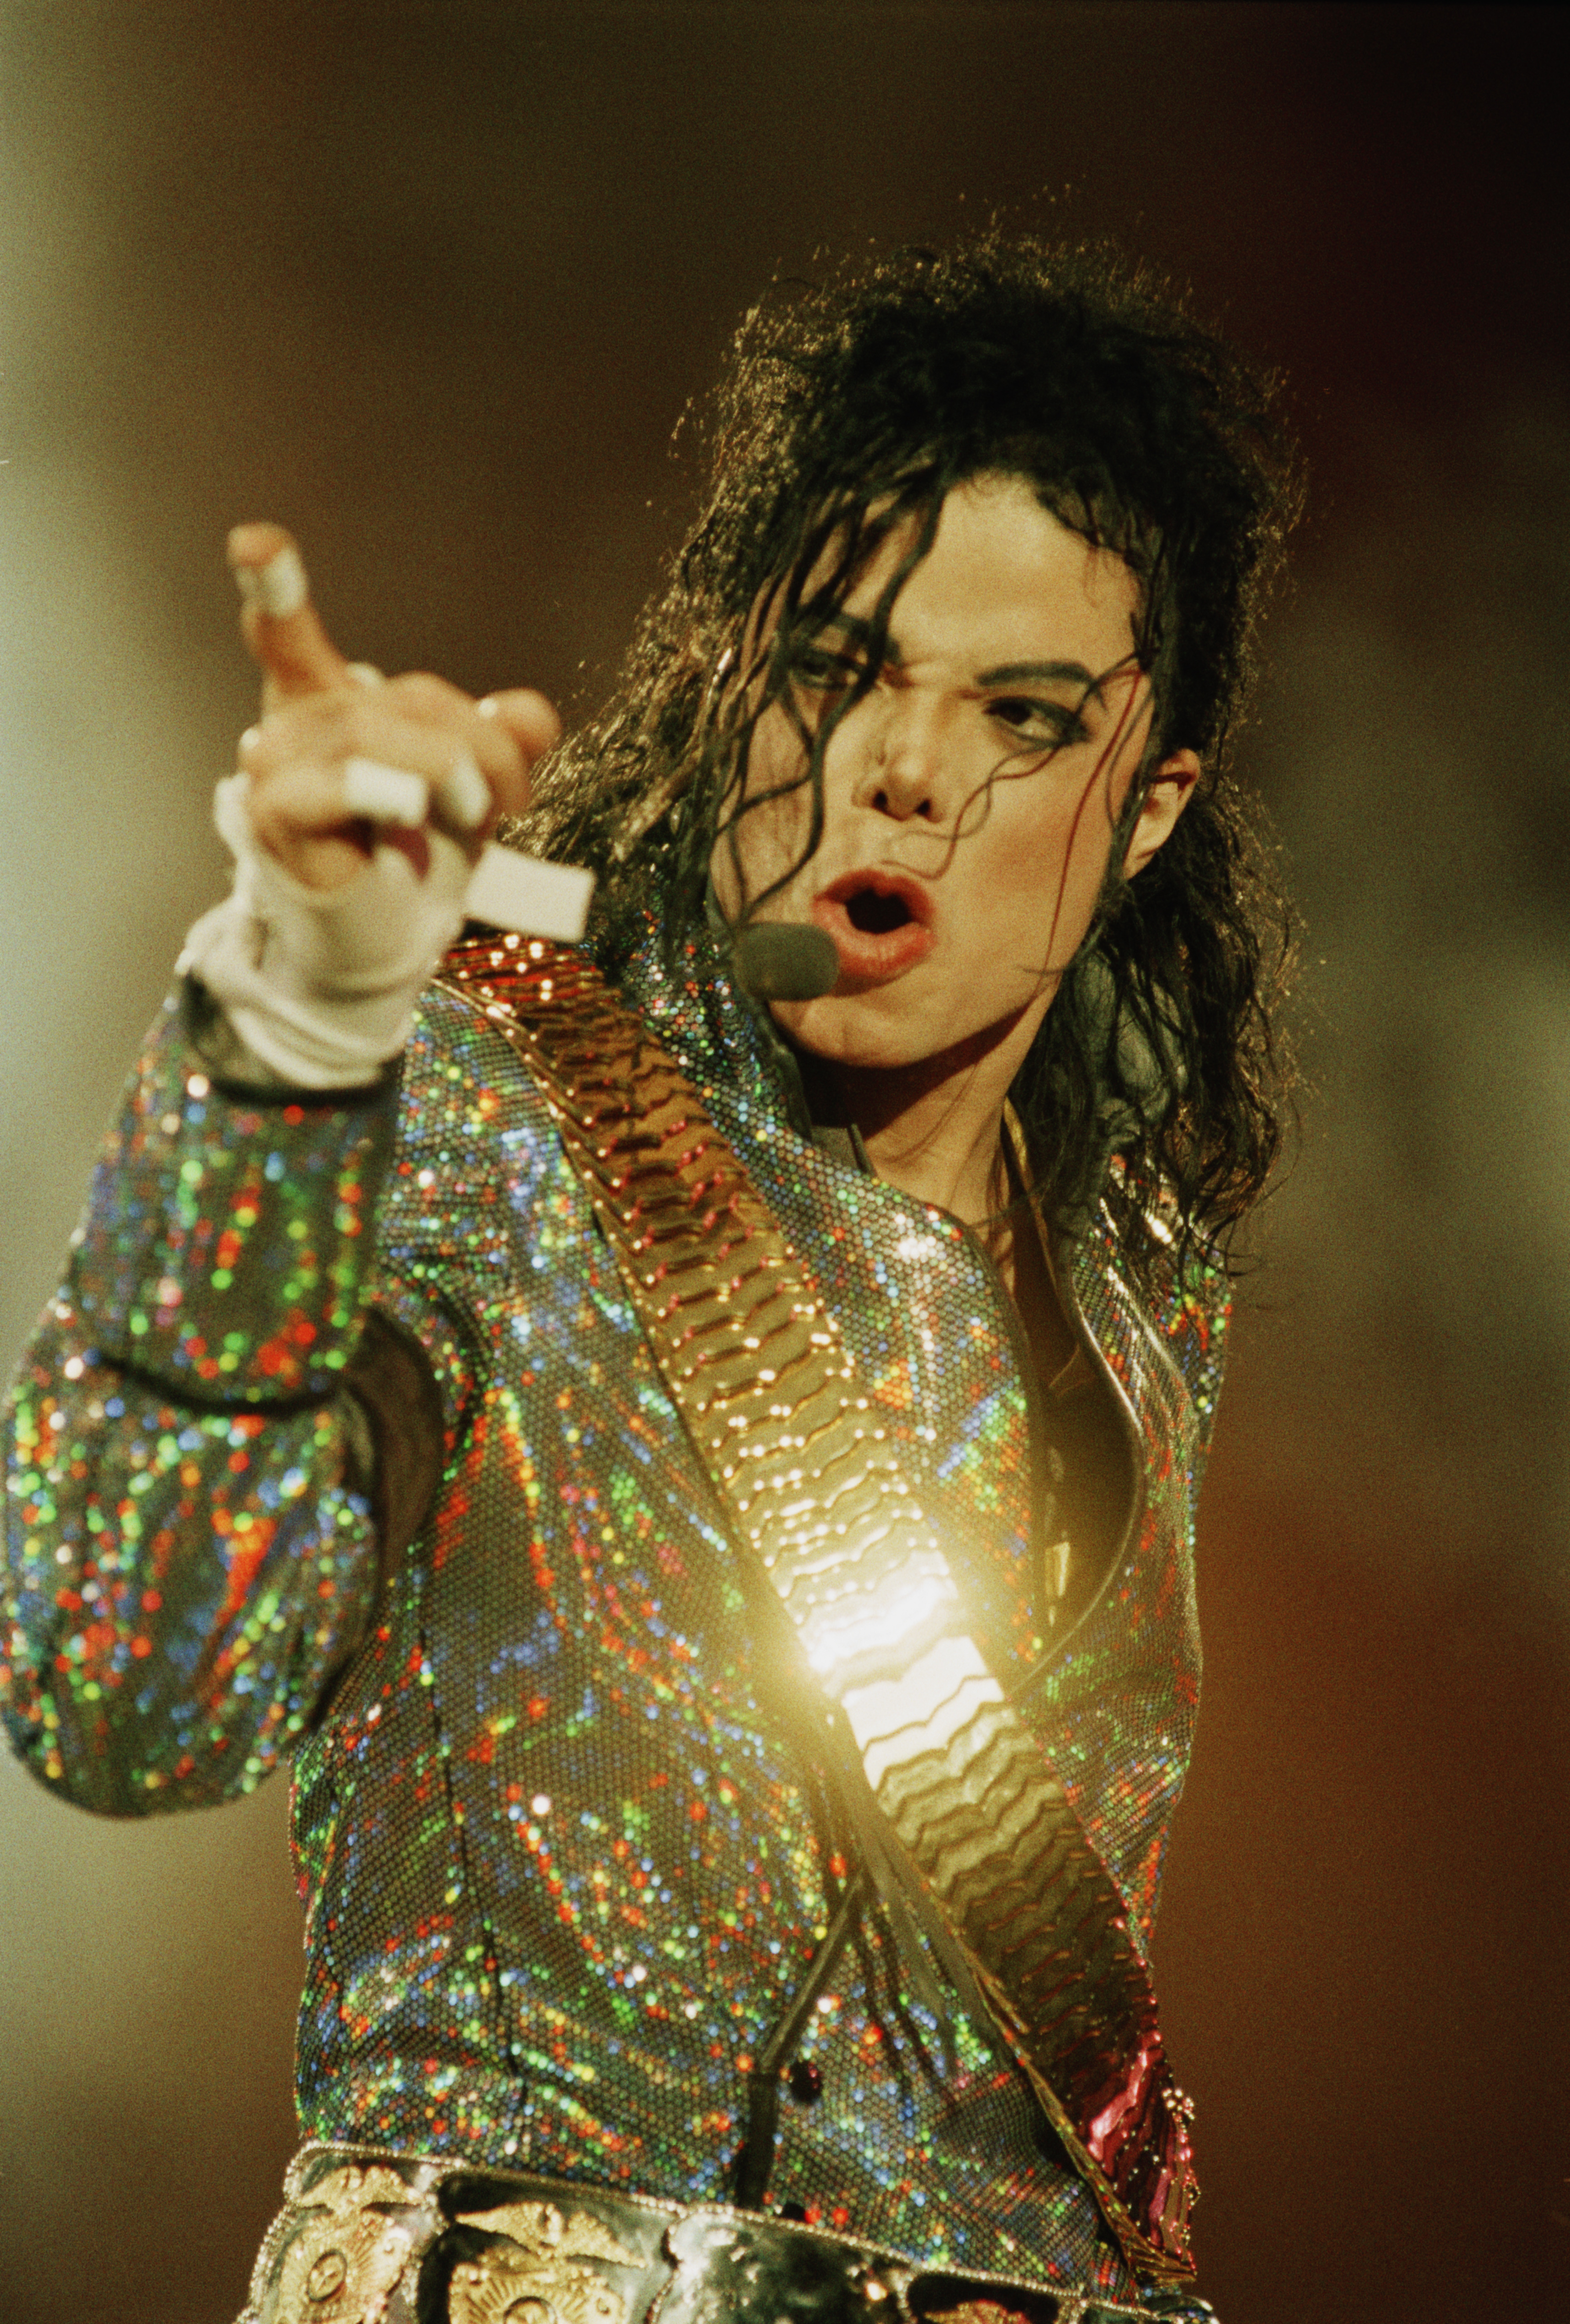 Michael Jackson performing at Wembley Stadium in London on July 30, 1992 | Source: Getty Images